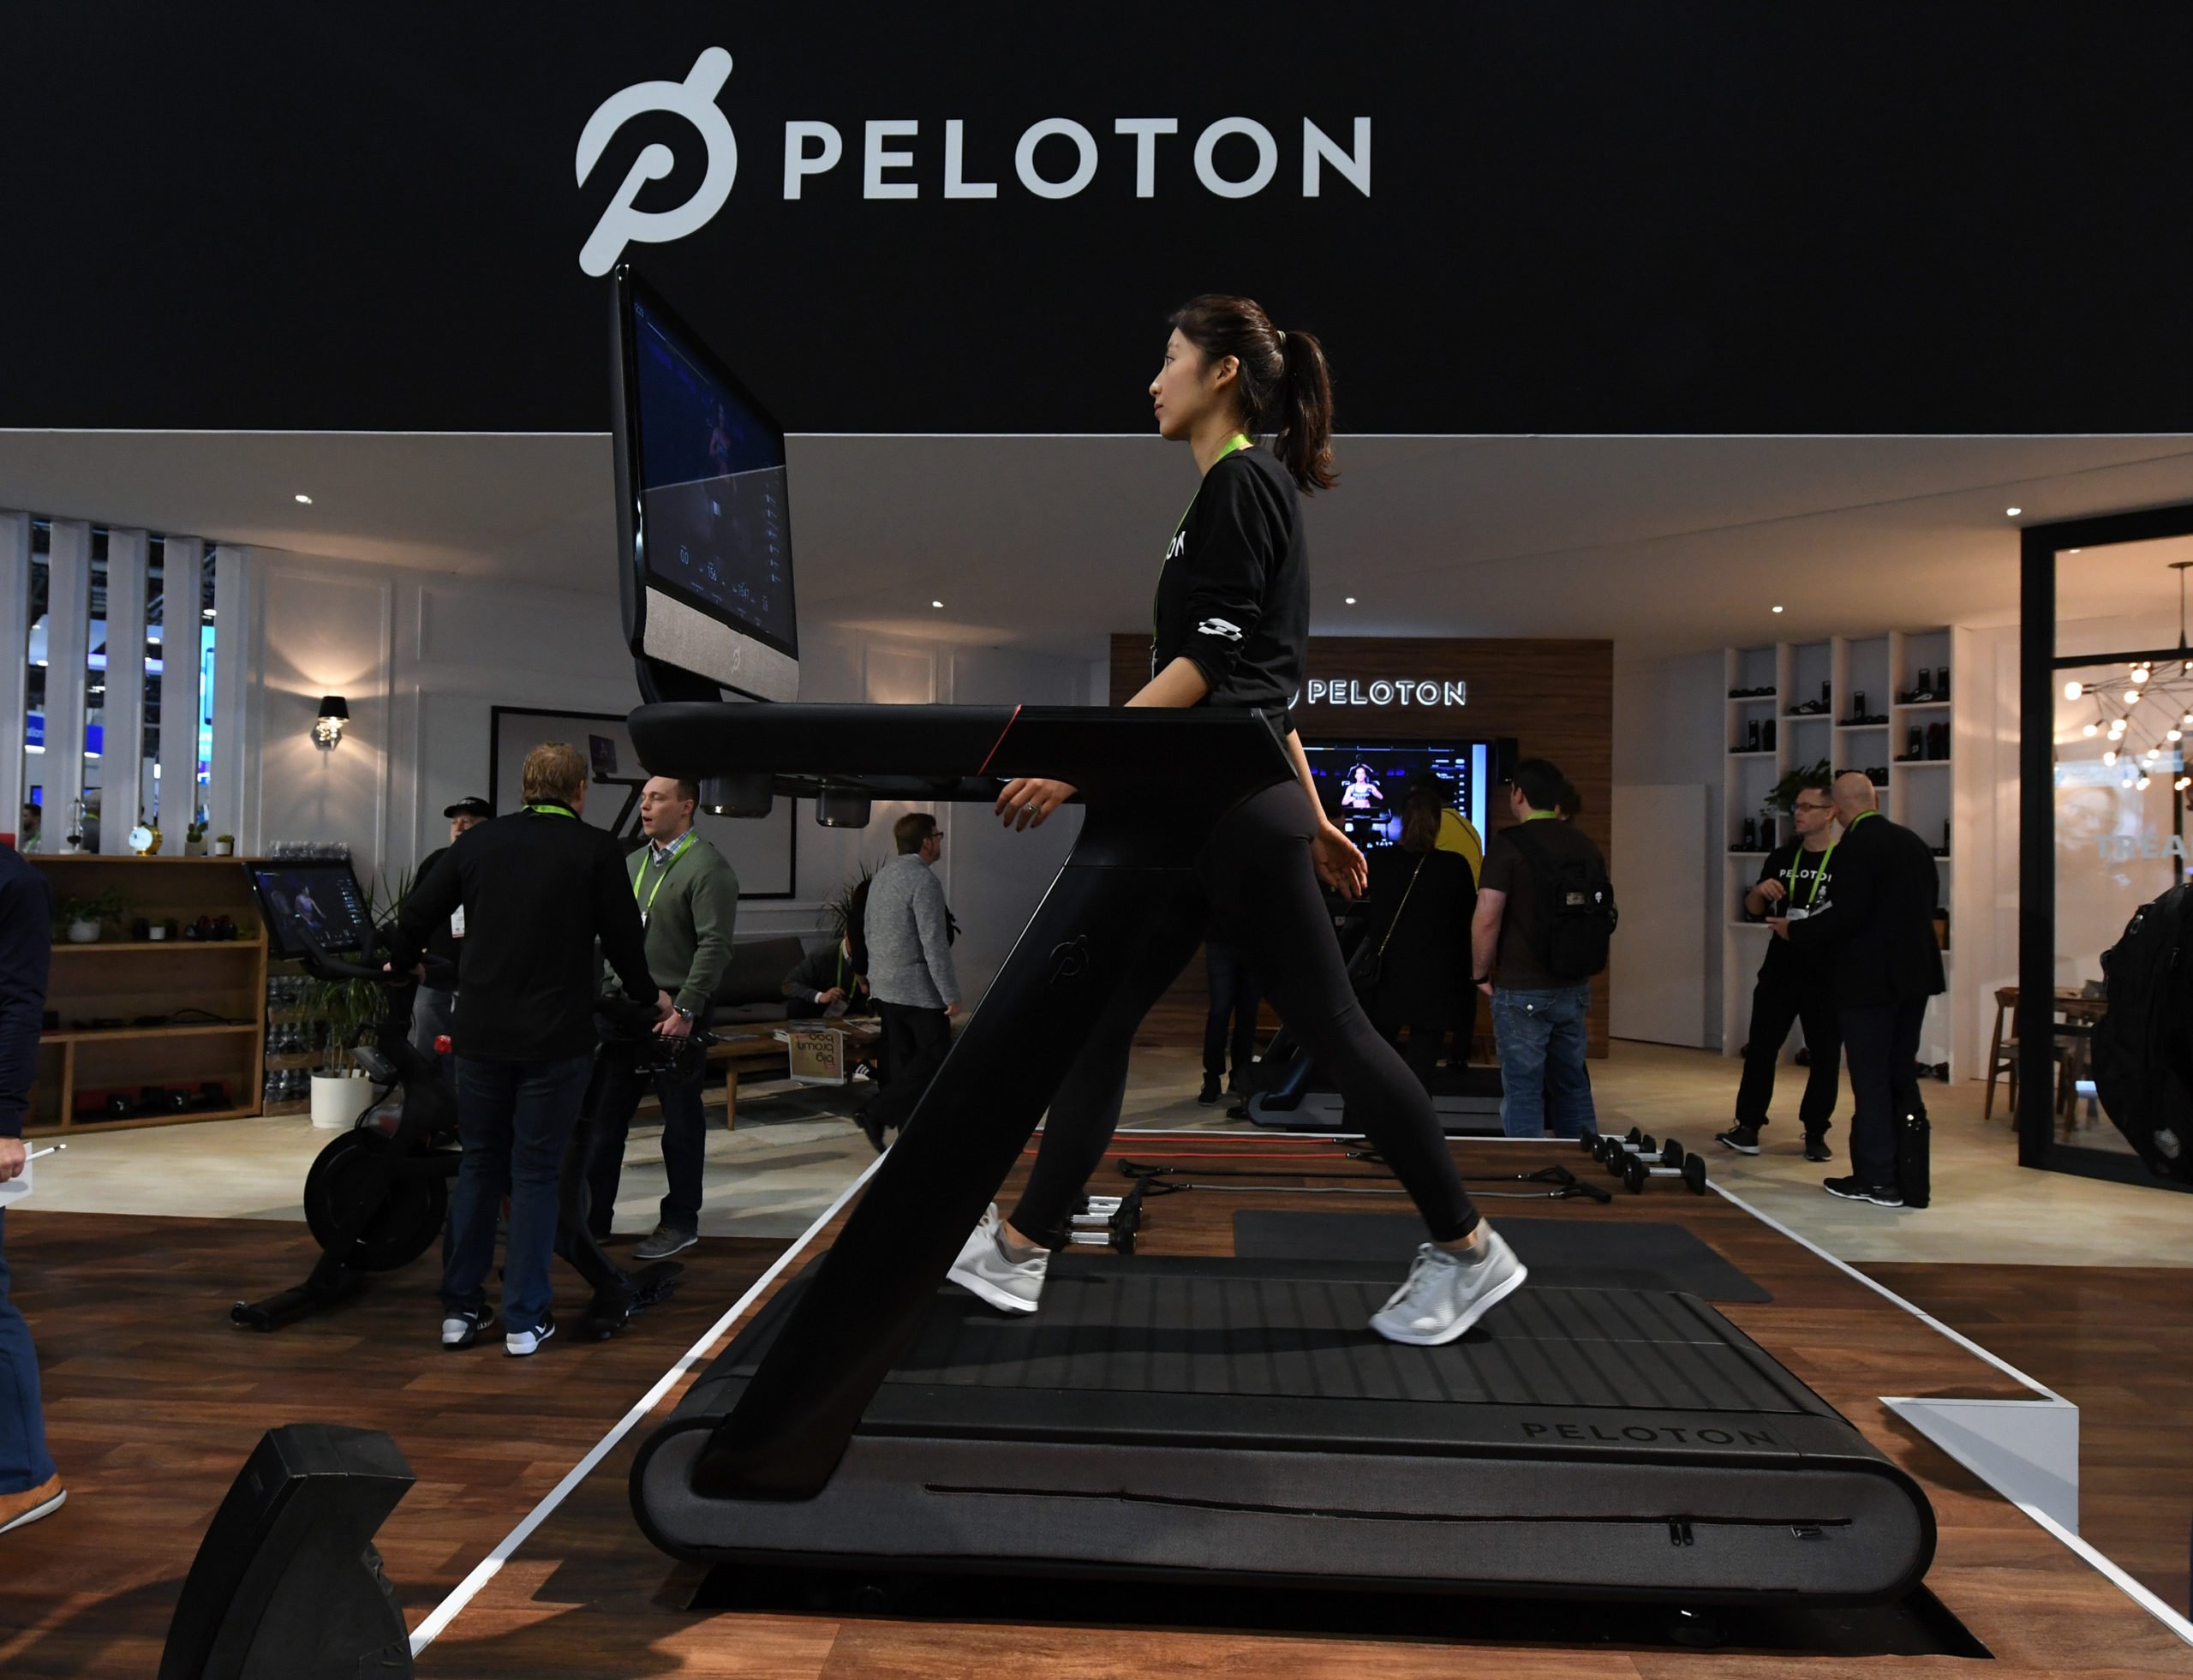 LAS VEGAS, NV - JANUARY 11: Maggie Lu uses a Peloton Tread treadmill during CES 2018 at the Las Vegas Convention Center on January 11, 2018 in Las Vegas, Nevada. The USD 3,995 workout machine is expected to be available later this year and features a 32-inch touch screen that connects users to instructors giving live or on-demand fitness classes. CES, the world's largest annual consumer technology trade show, runs through January 12 and features about 3,900 exhibitors showing off their latest products and services to more than 170,000 attendees. (Photo by Ethan Miller/Getty Images)